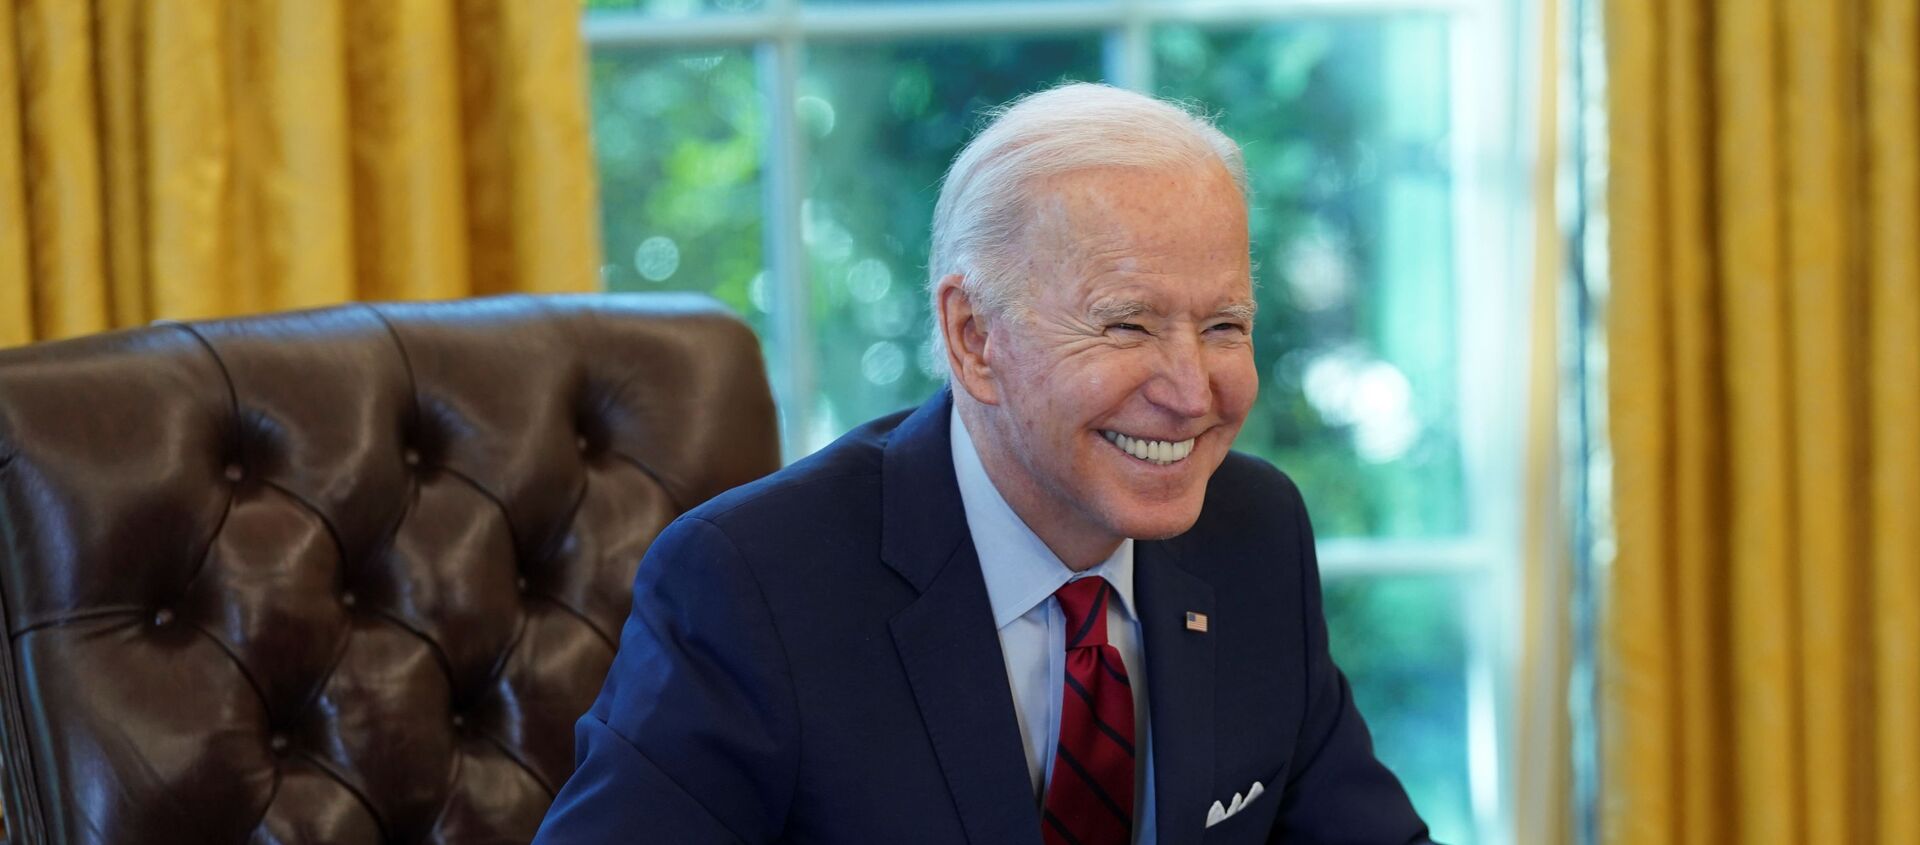 U.S. President Joe Biden smiles after signing executive orders strengthening access to affordable healthcare at the White House in Washington, U.S., January 28, 2021 - Sputnik International, 1920, 12.02.2021